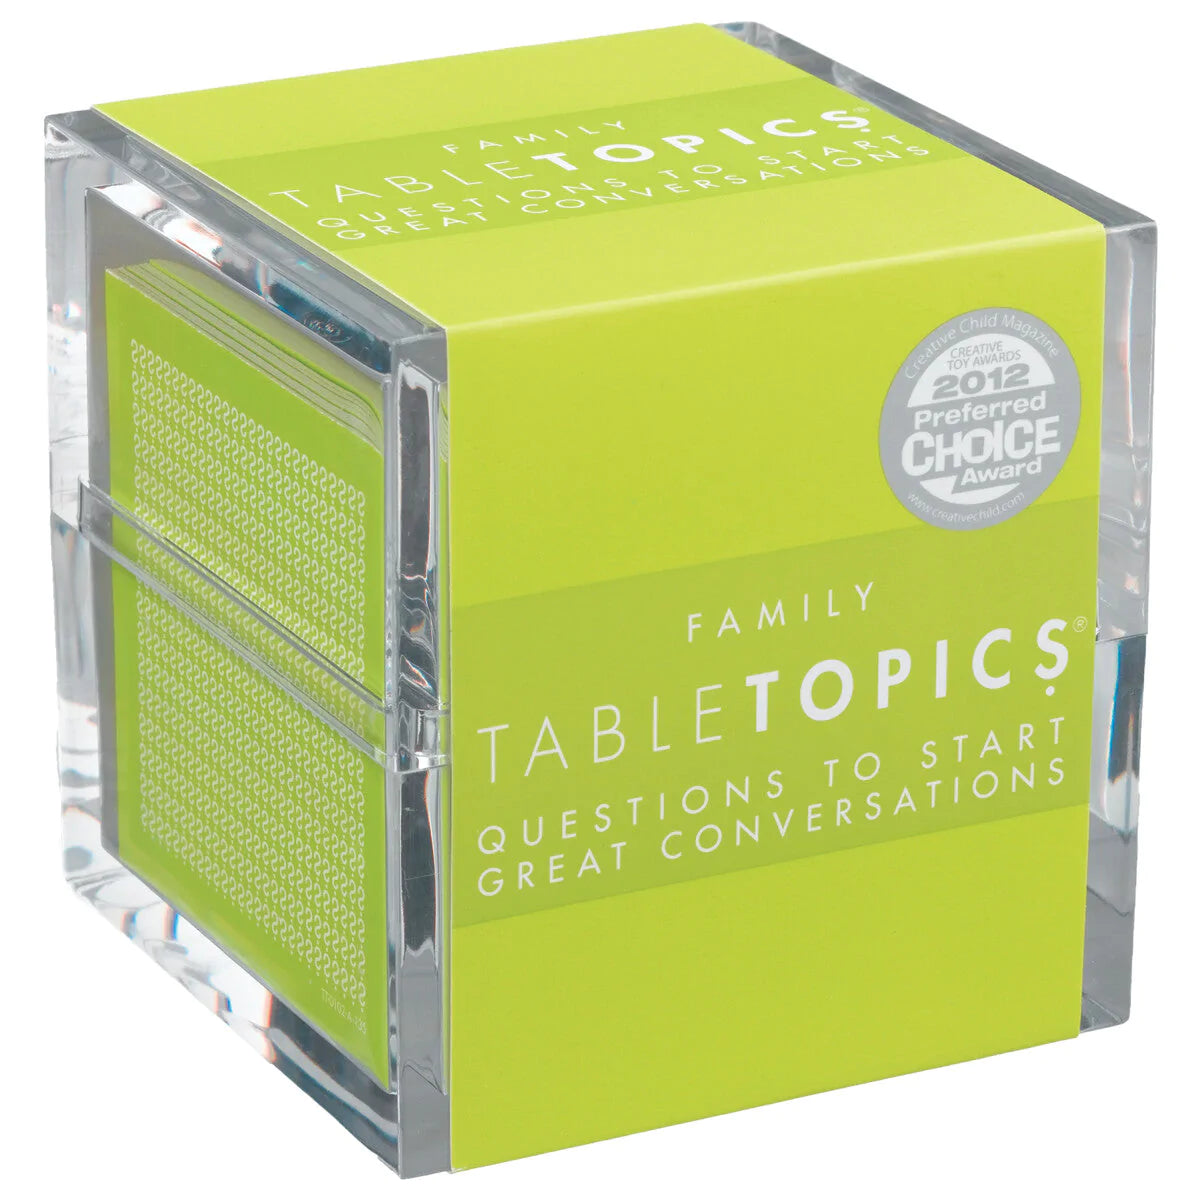 On Sale- Table Topics? Family Edition